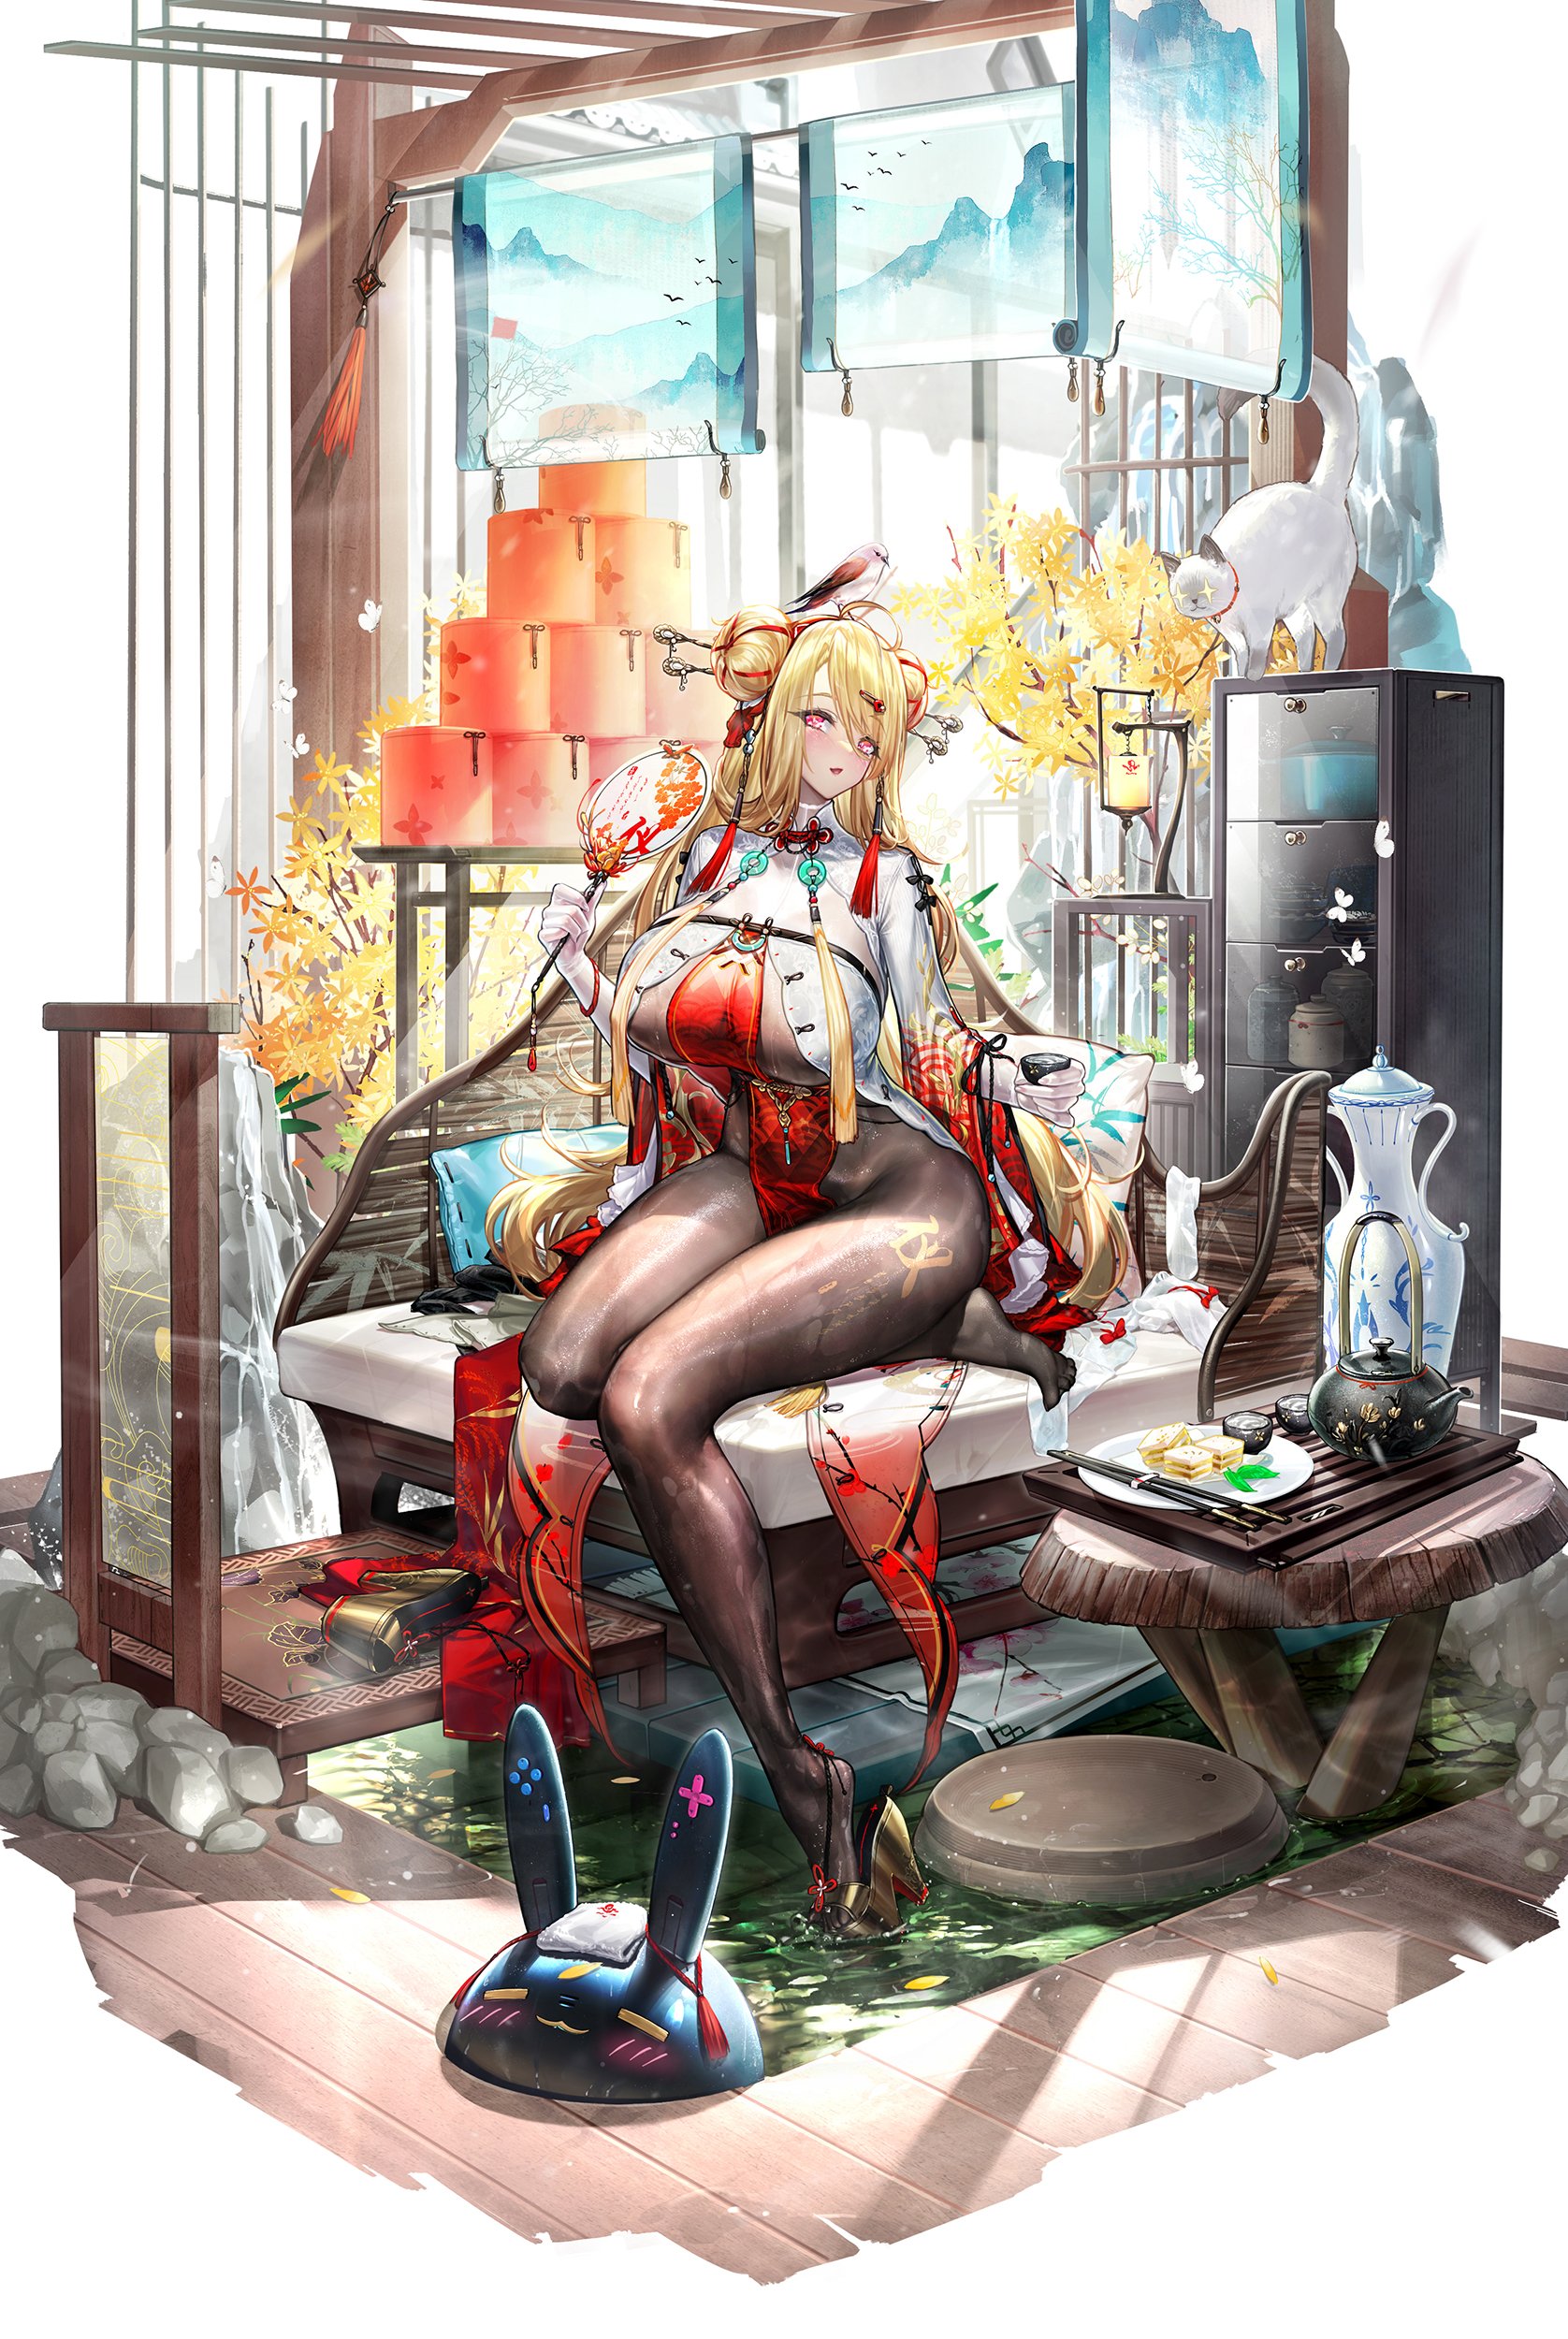 Anime 1676x2500 Dk. Senie Cross Core blonde looking at viewer hair ornament pantyhose hairbun asian clothing bodysuit big boobs wet clothing birds women indoors fans hair stick open mouth cats sitting water